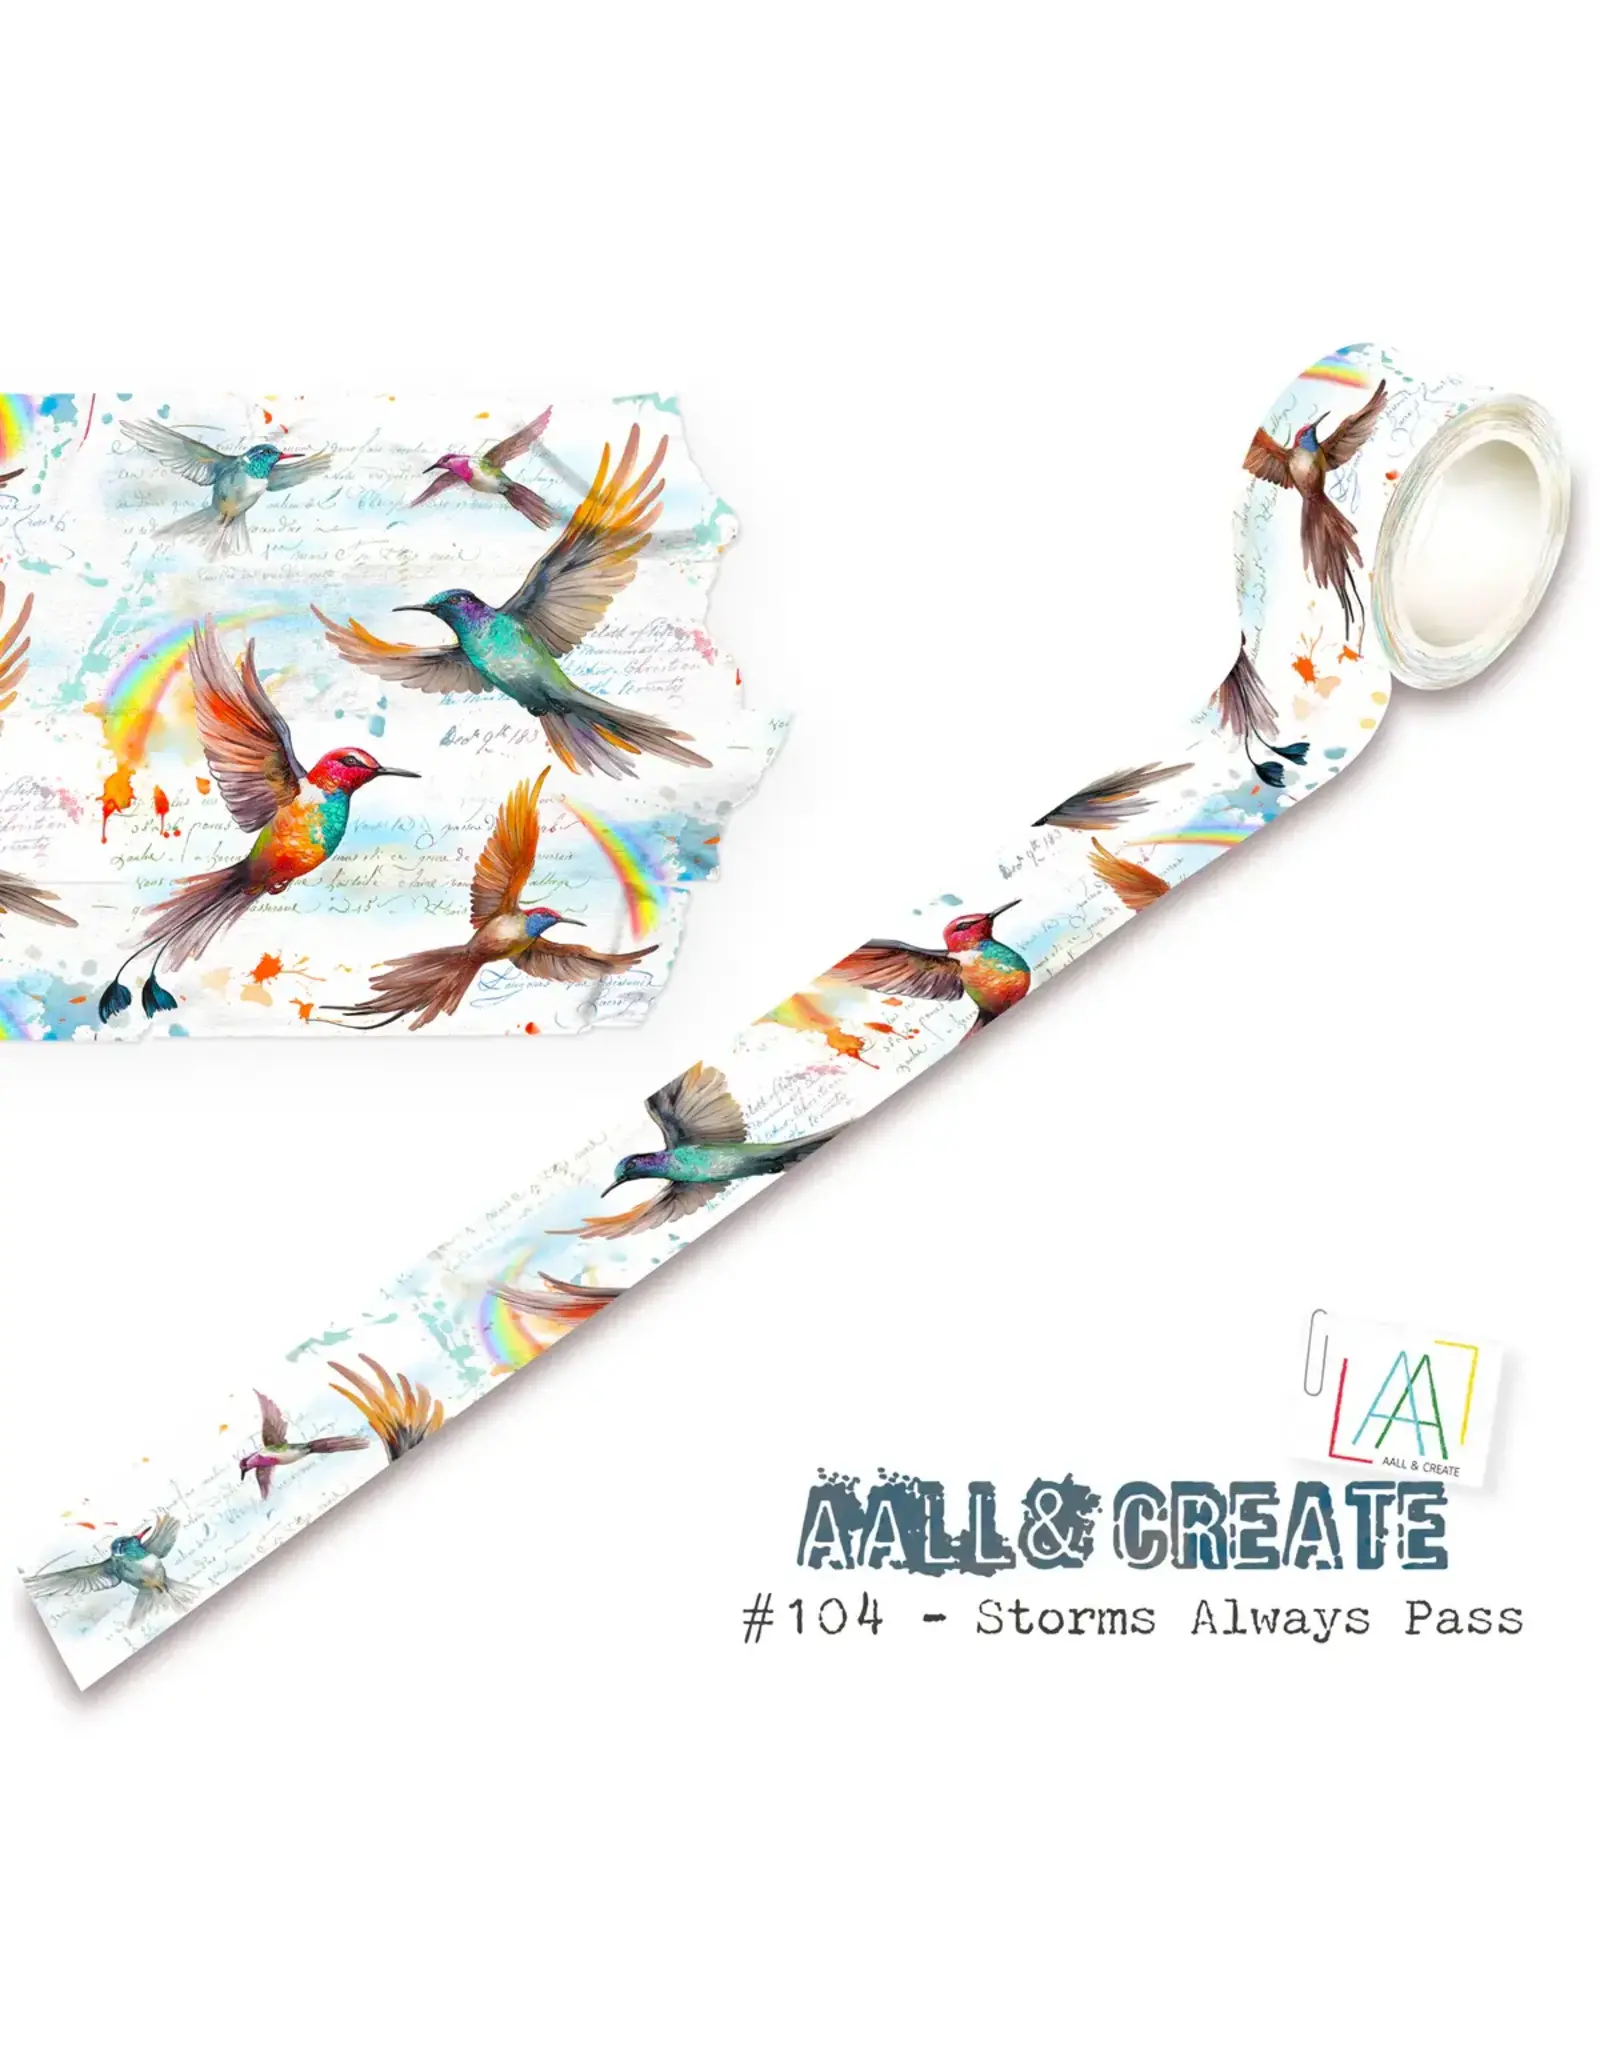 AALL & CREATE AALL & CREATE AUTOUR DE MWA #104 STORMS ALWAYS PASS LAYER IT UP! WASHI TAPE